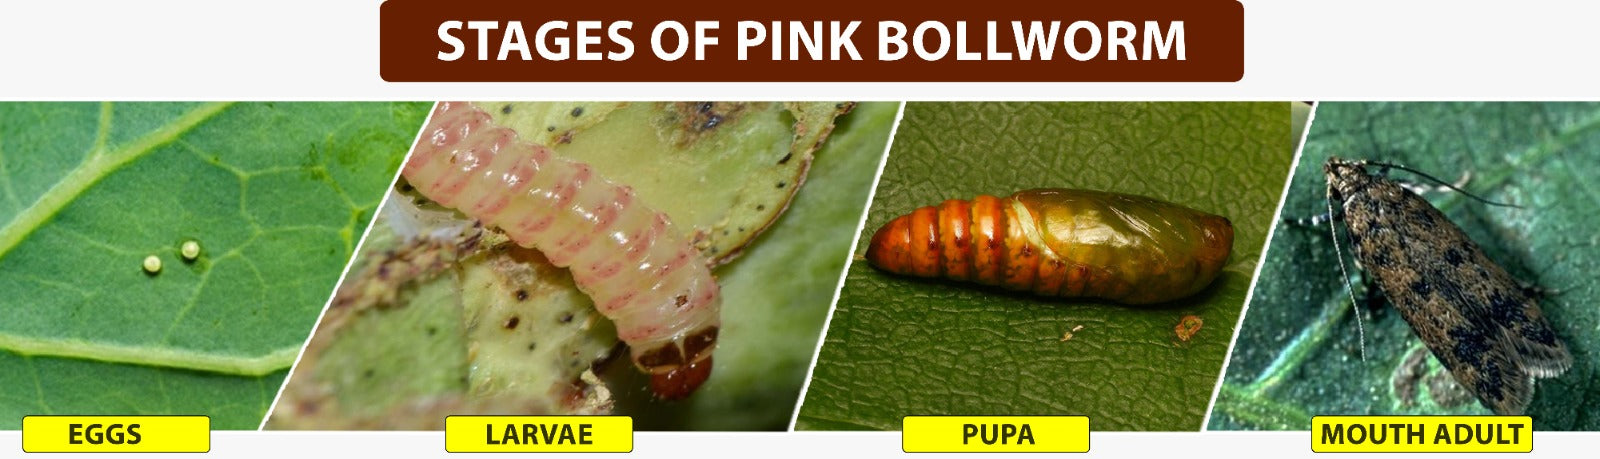 Life Stage of Pink Bollworm